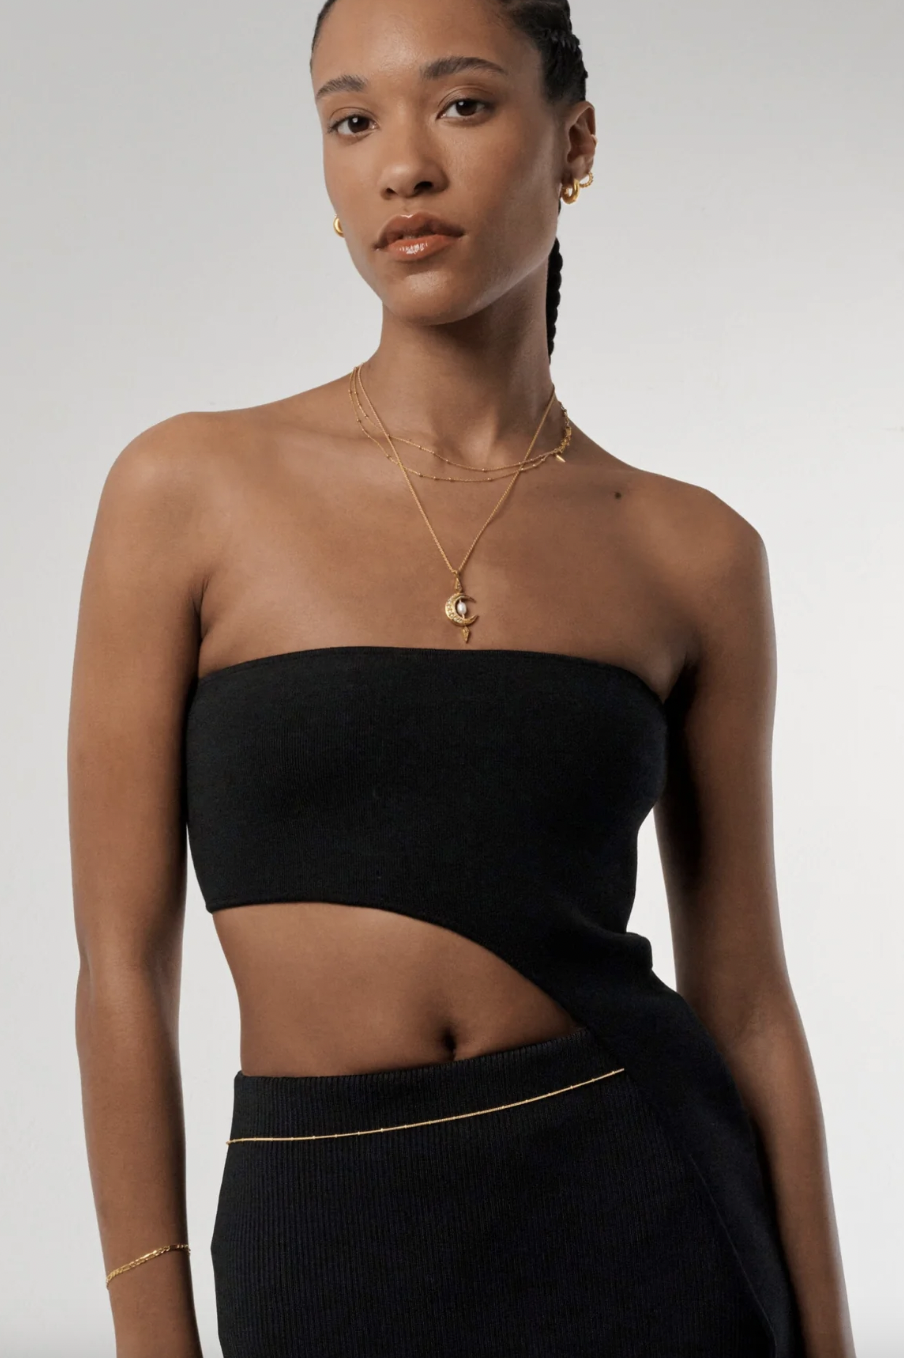 9 Best Body Chains for Summer 2018 - Body Chain Jewelry and